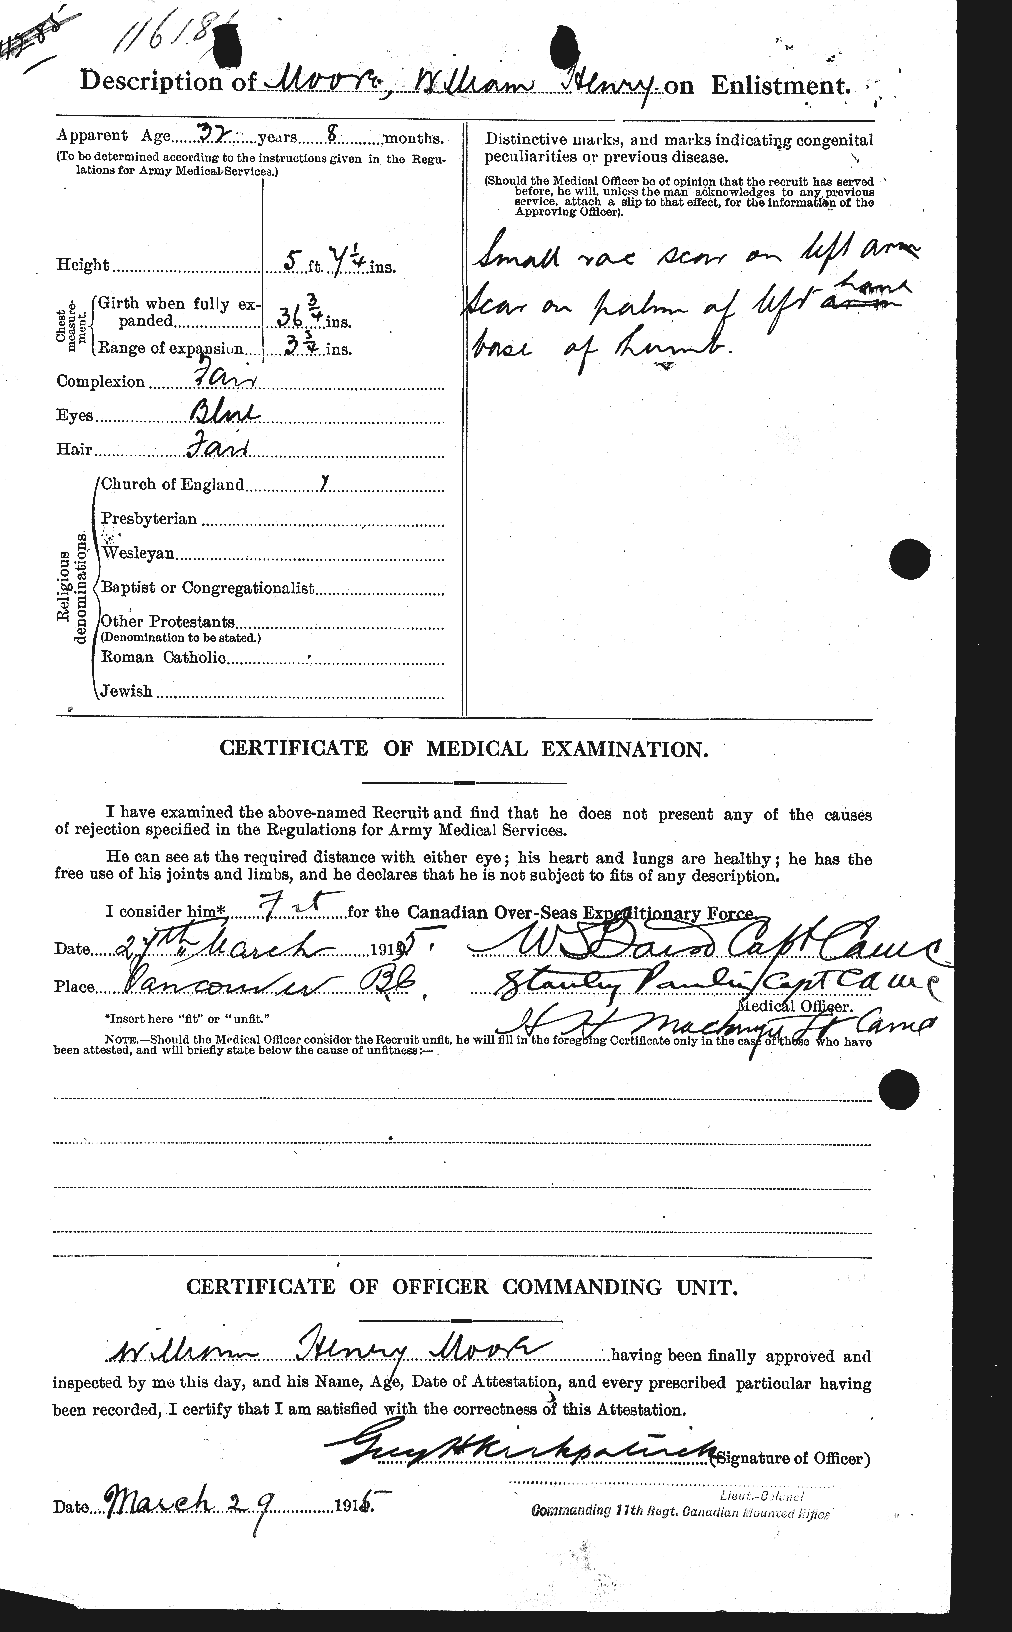 Personnel Records of the First World War - CEF 505826b